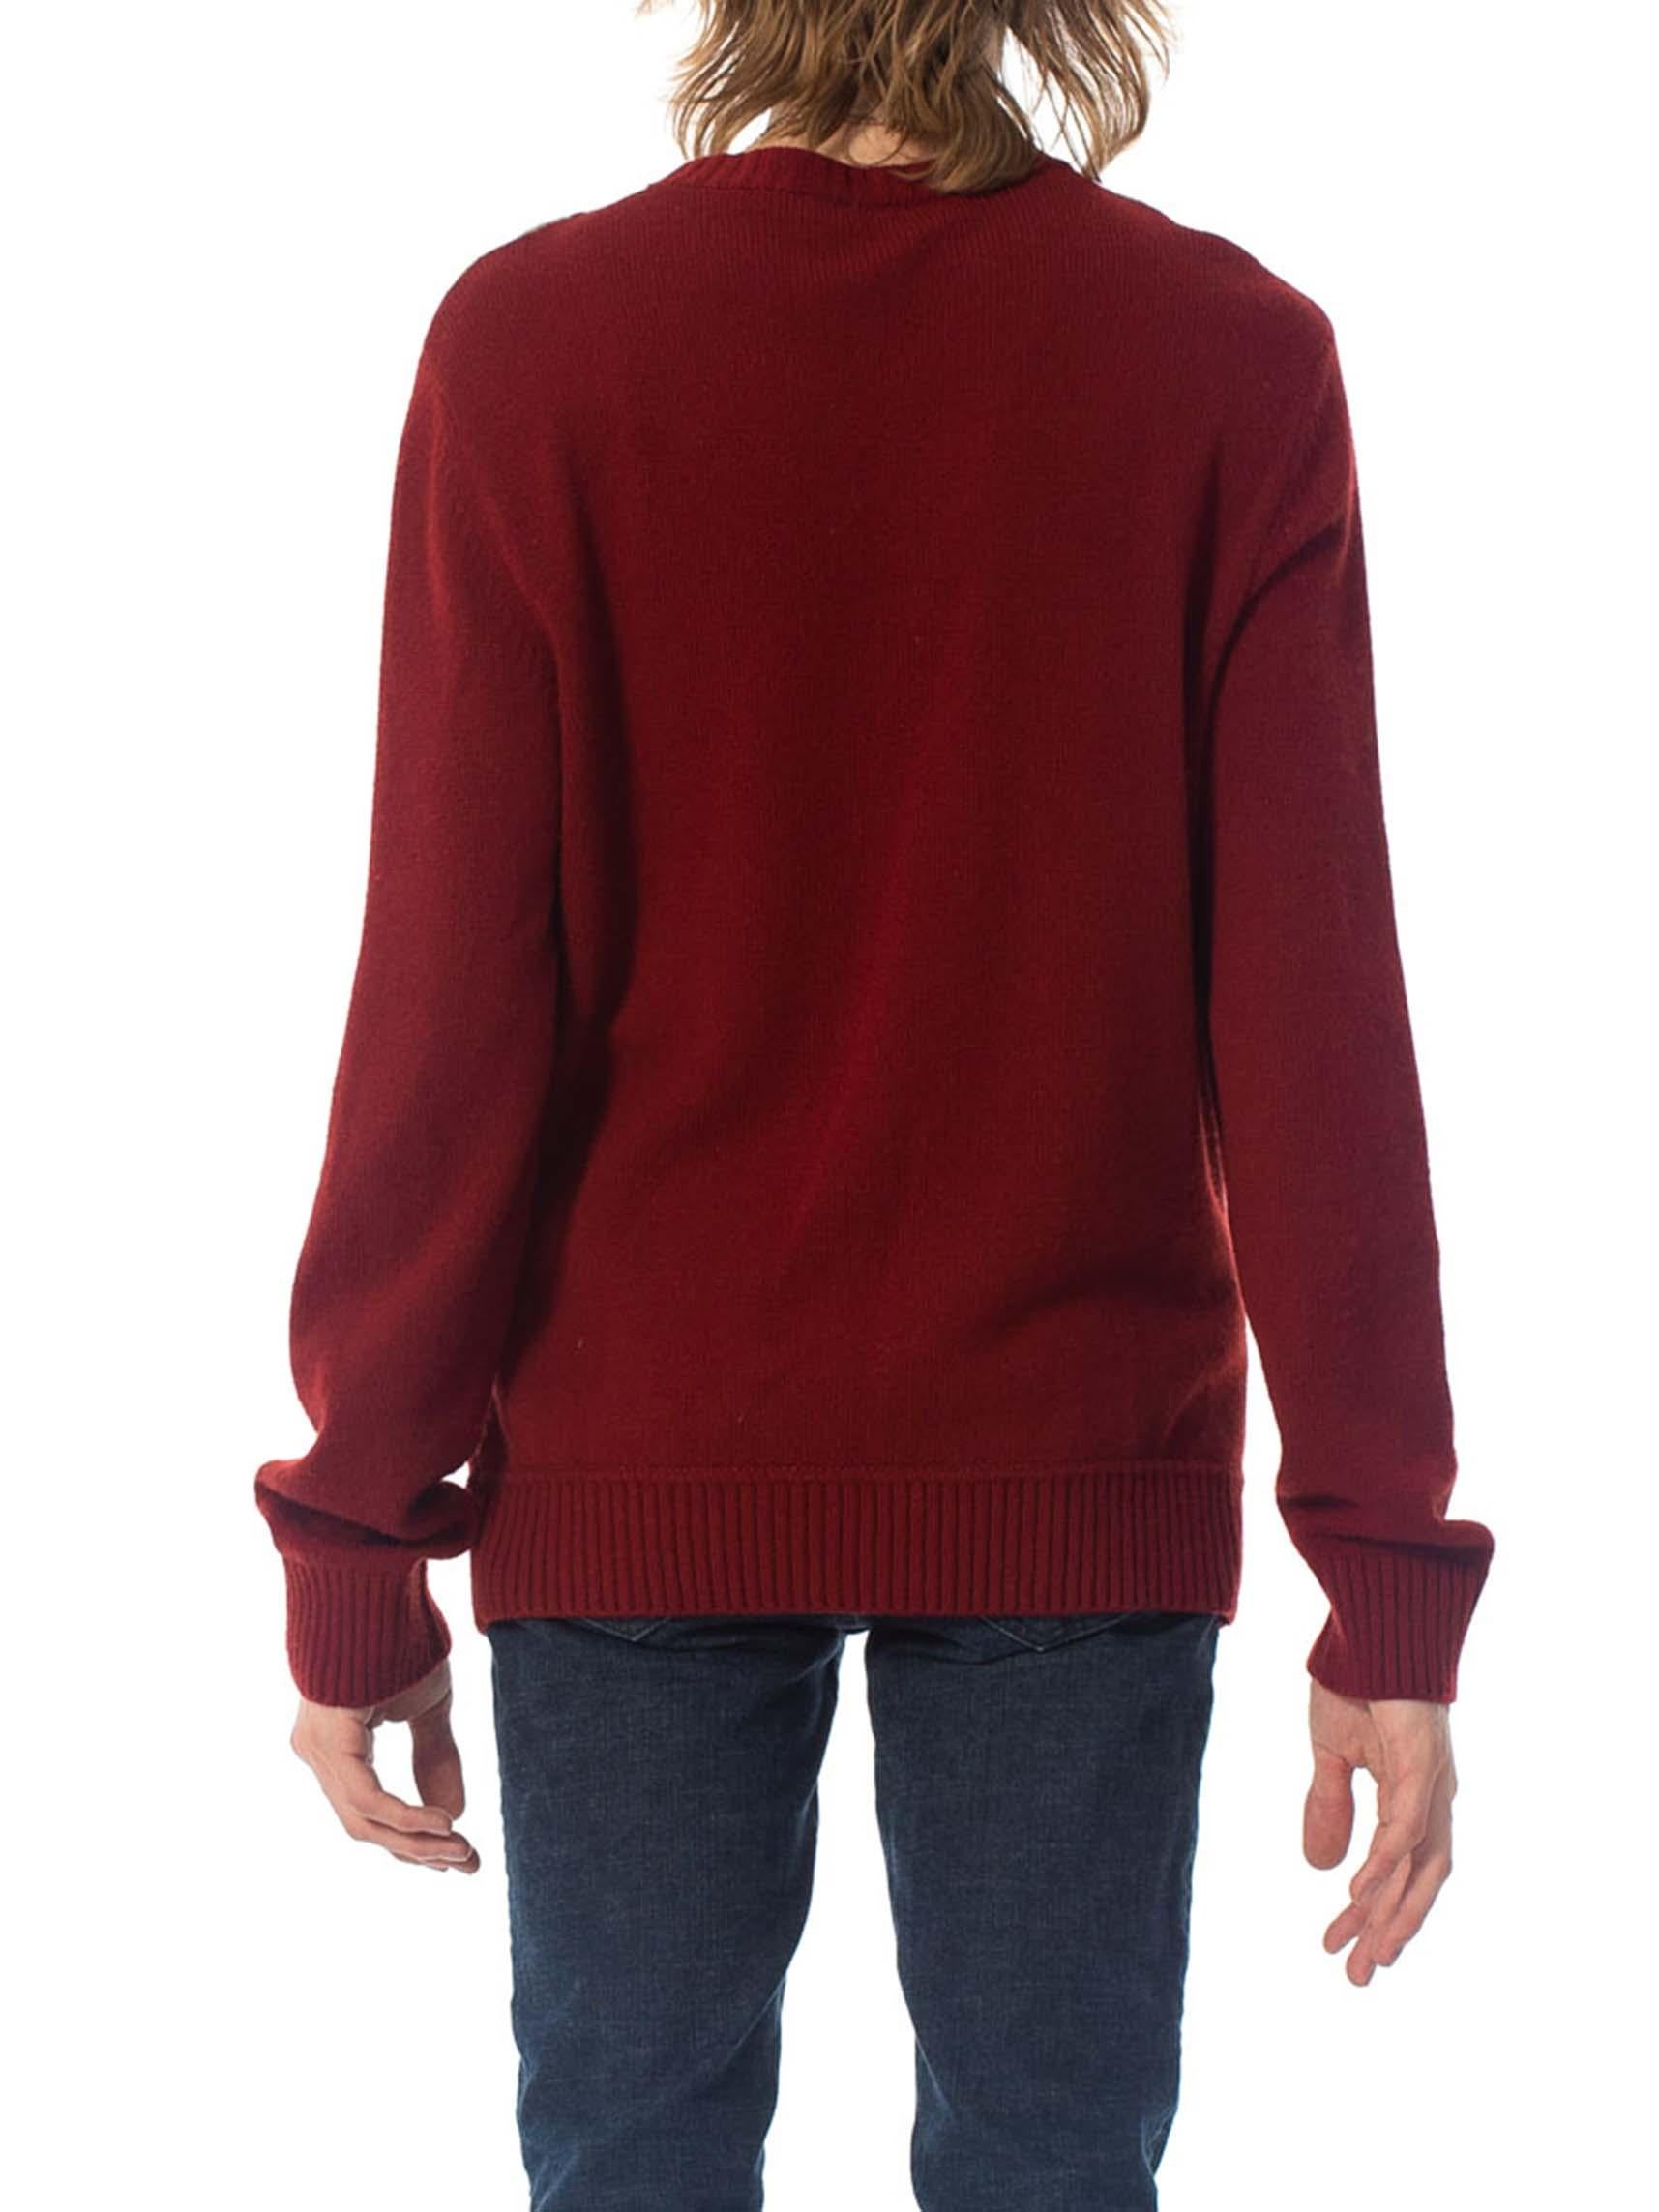 1970S HERMES Maroon & Silver Cashmere Men's Sweater 1